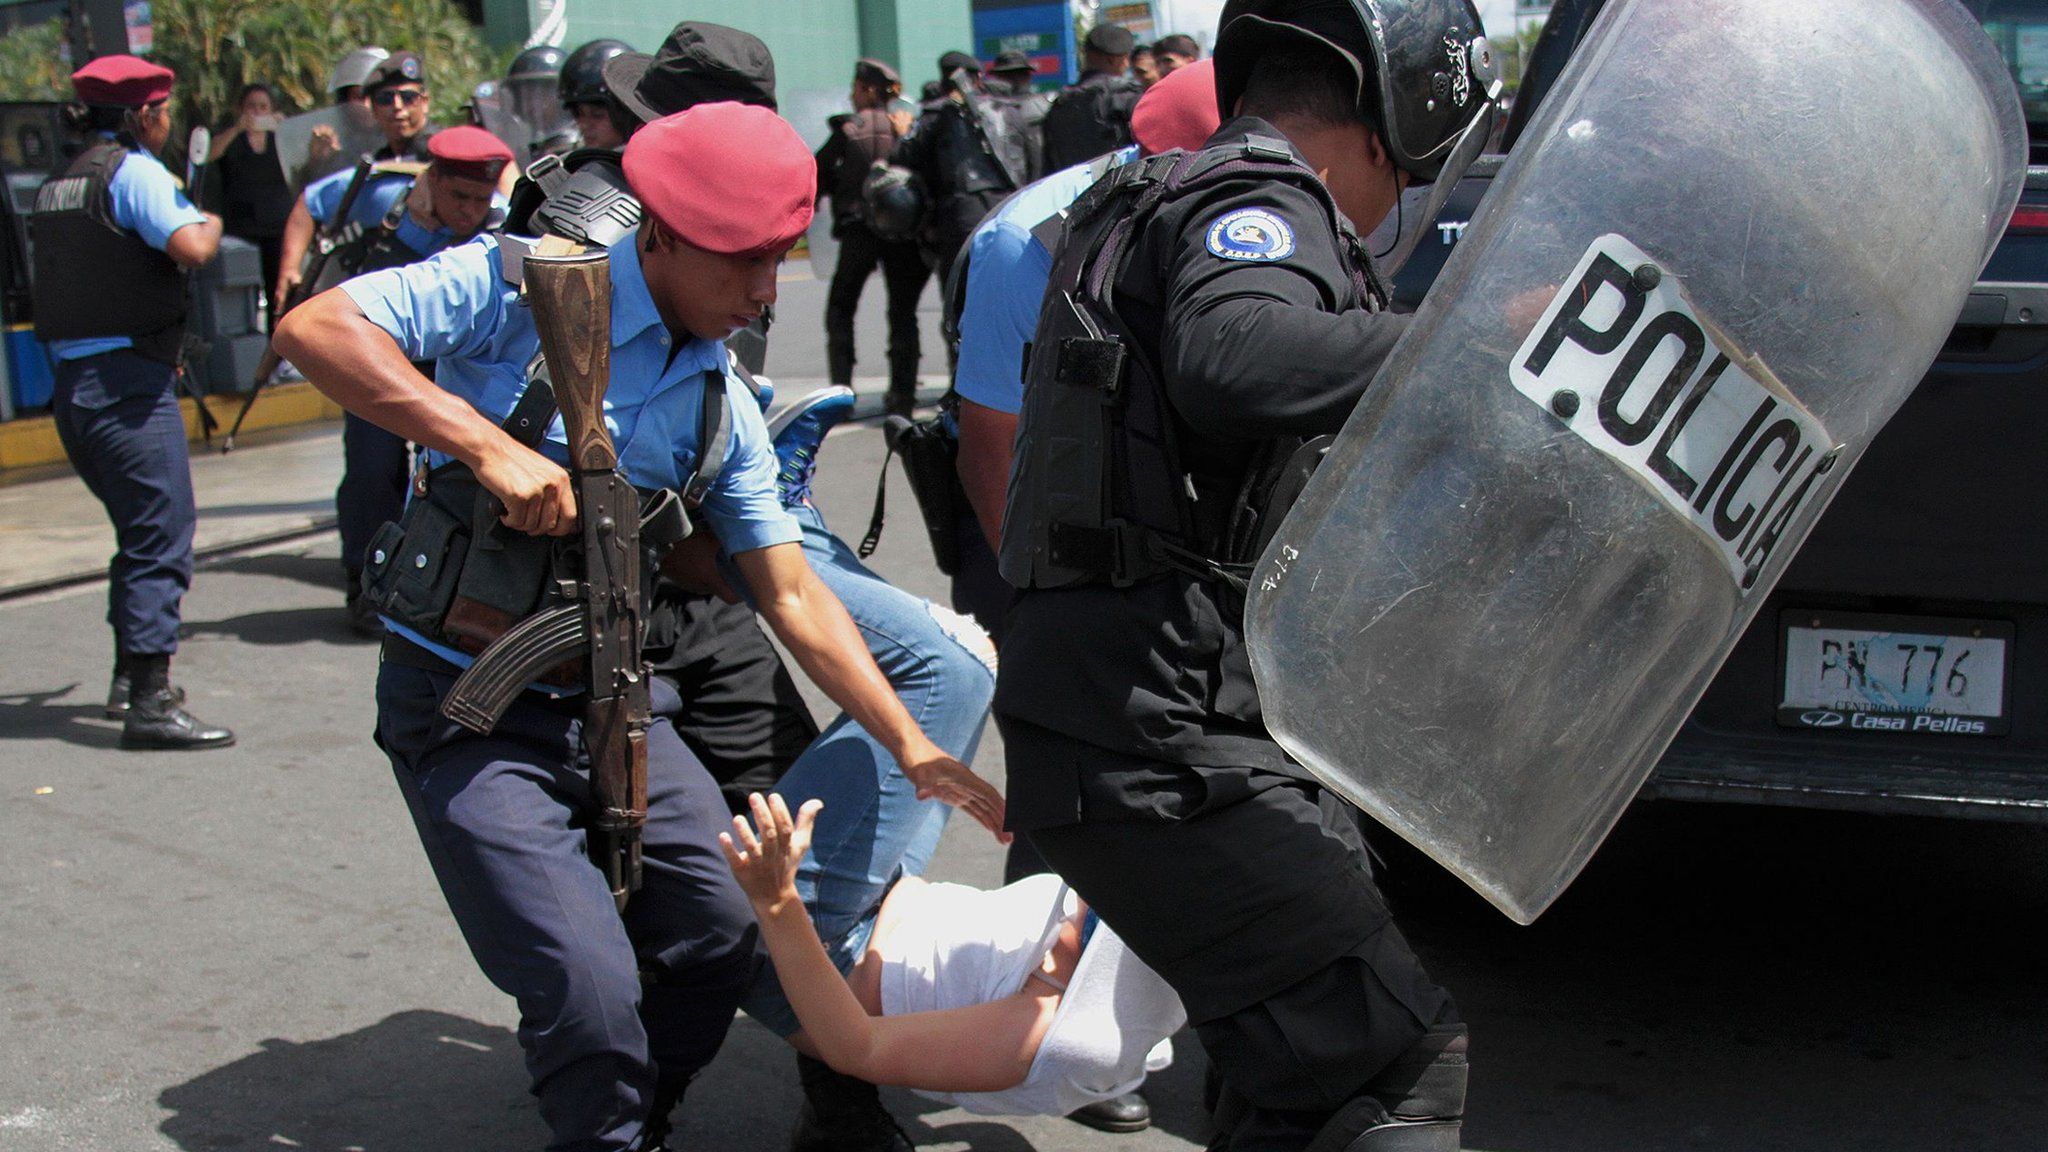 Nicaraguan riot police detain a protester demanding the government release opposition activists, in Managua on March 16, 2019